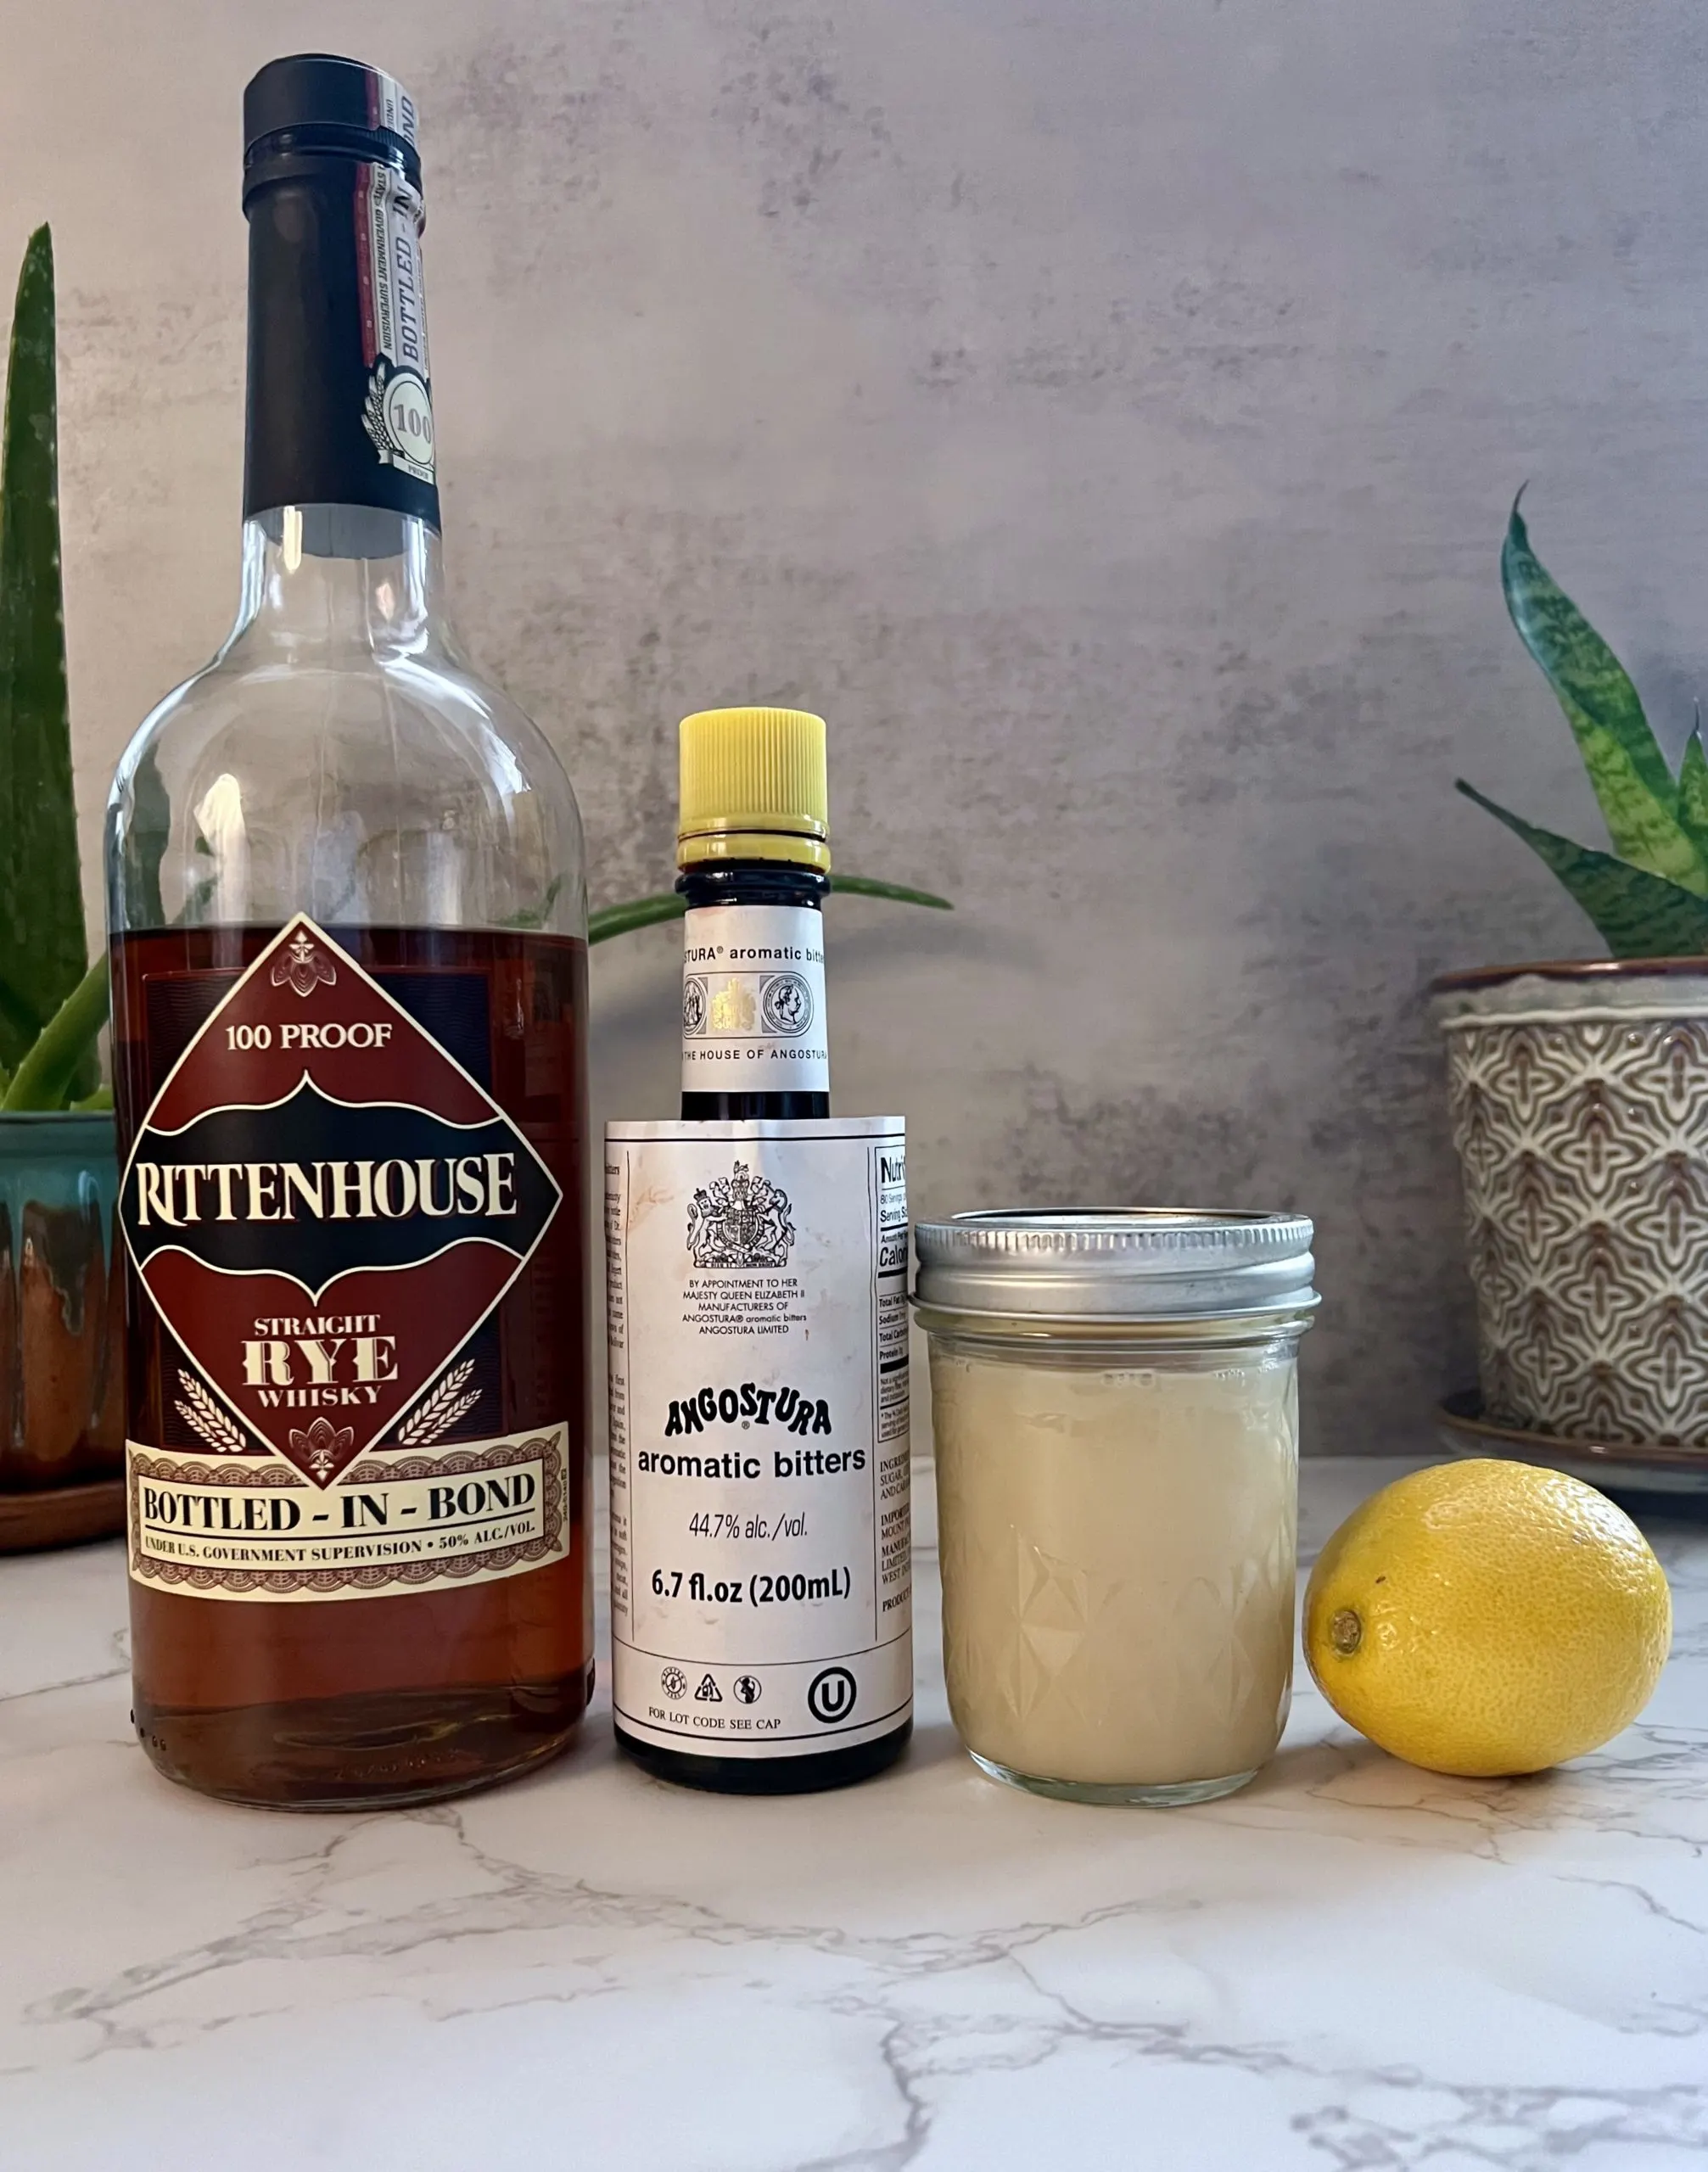 The ingredients of a Trinidad Sour, including a bottle of Rittenhouse Straight Rye Whisky, Angostura bitters, orgeat, and a lemon, all lined up on a countertop.